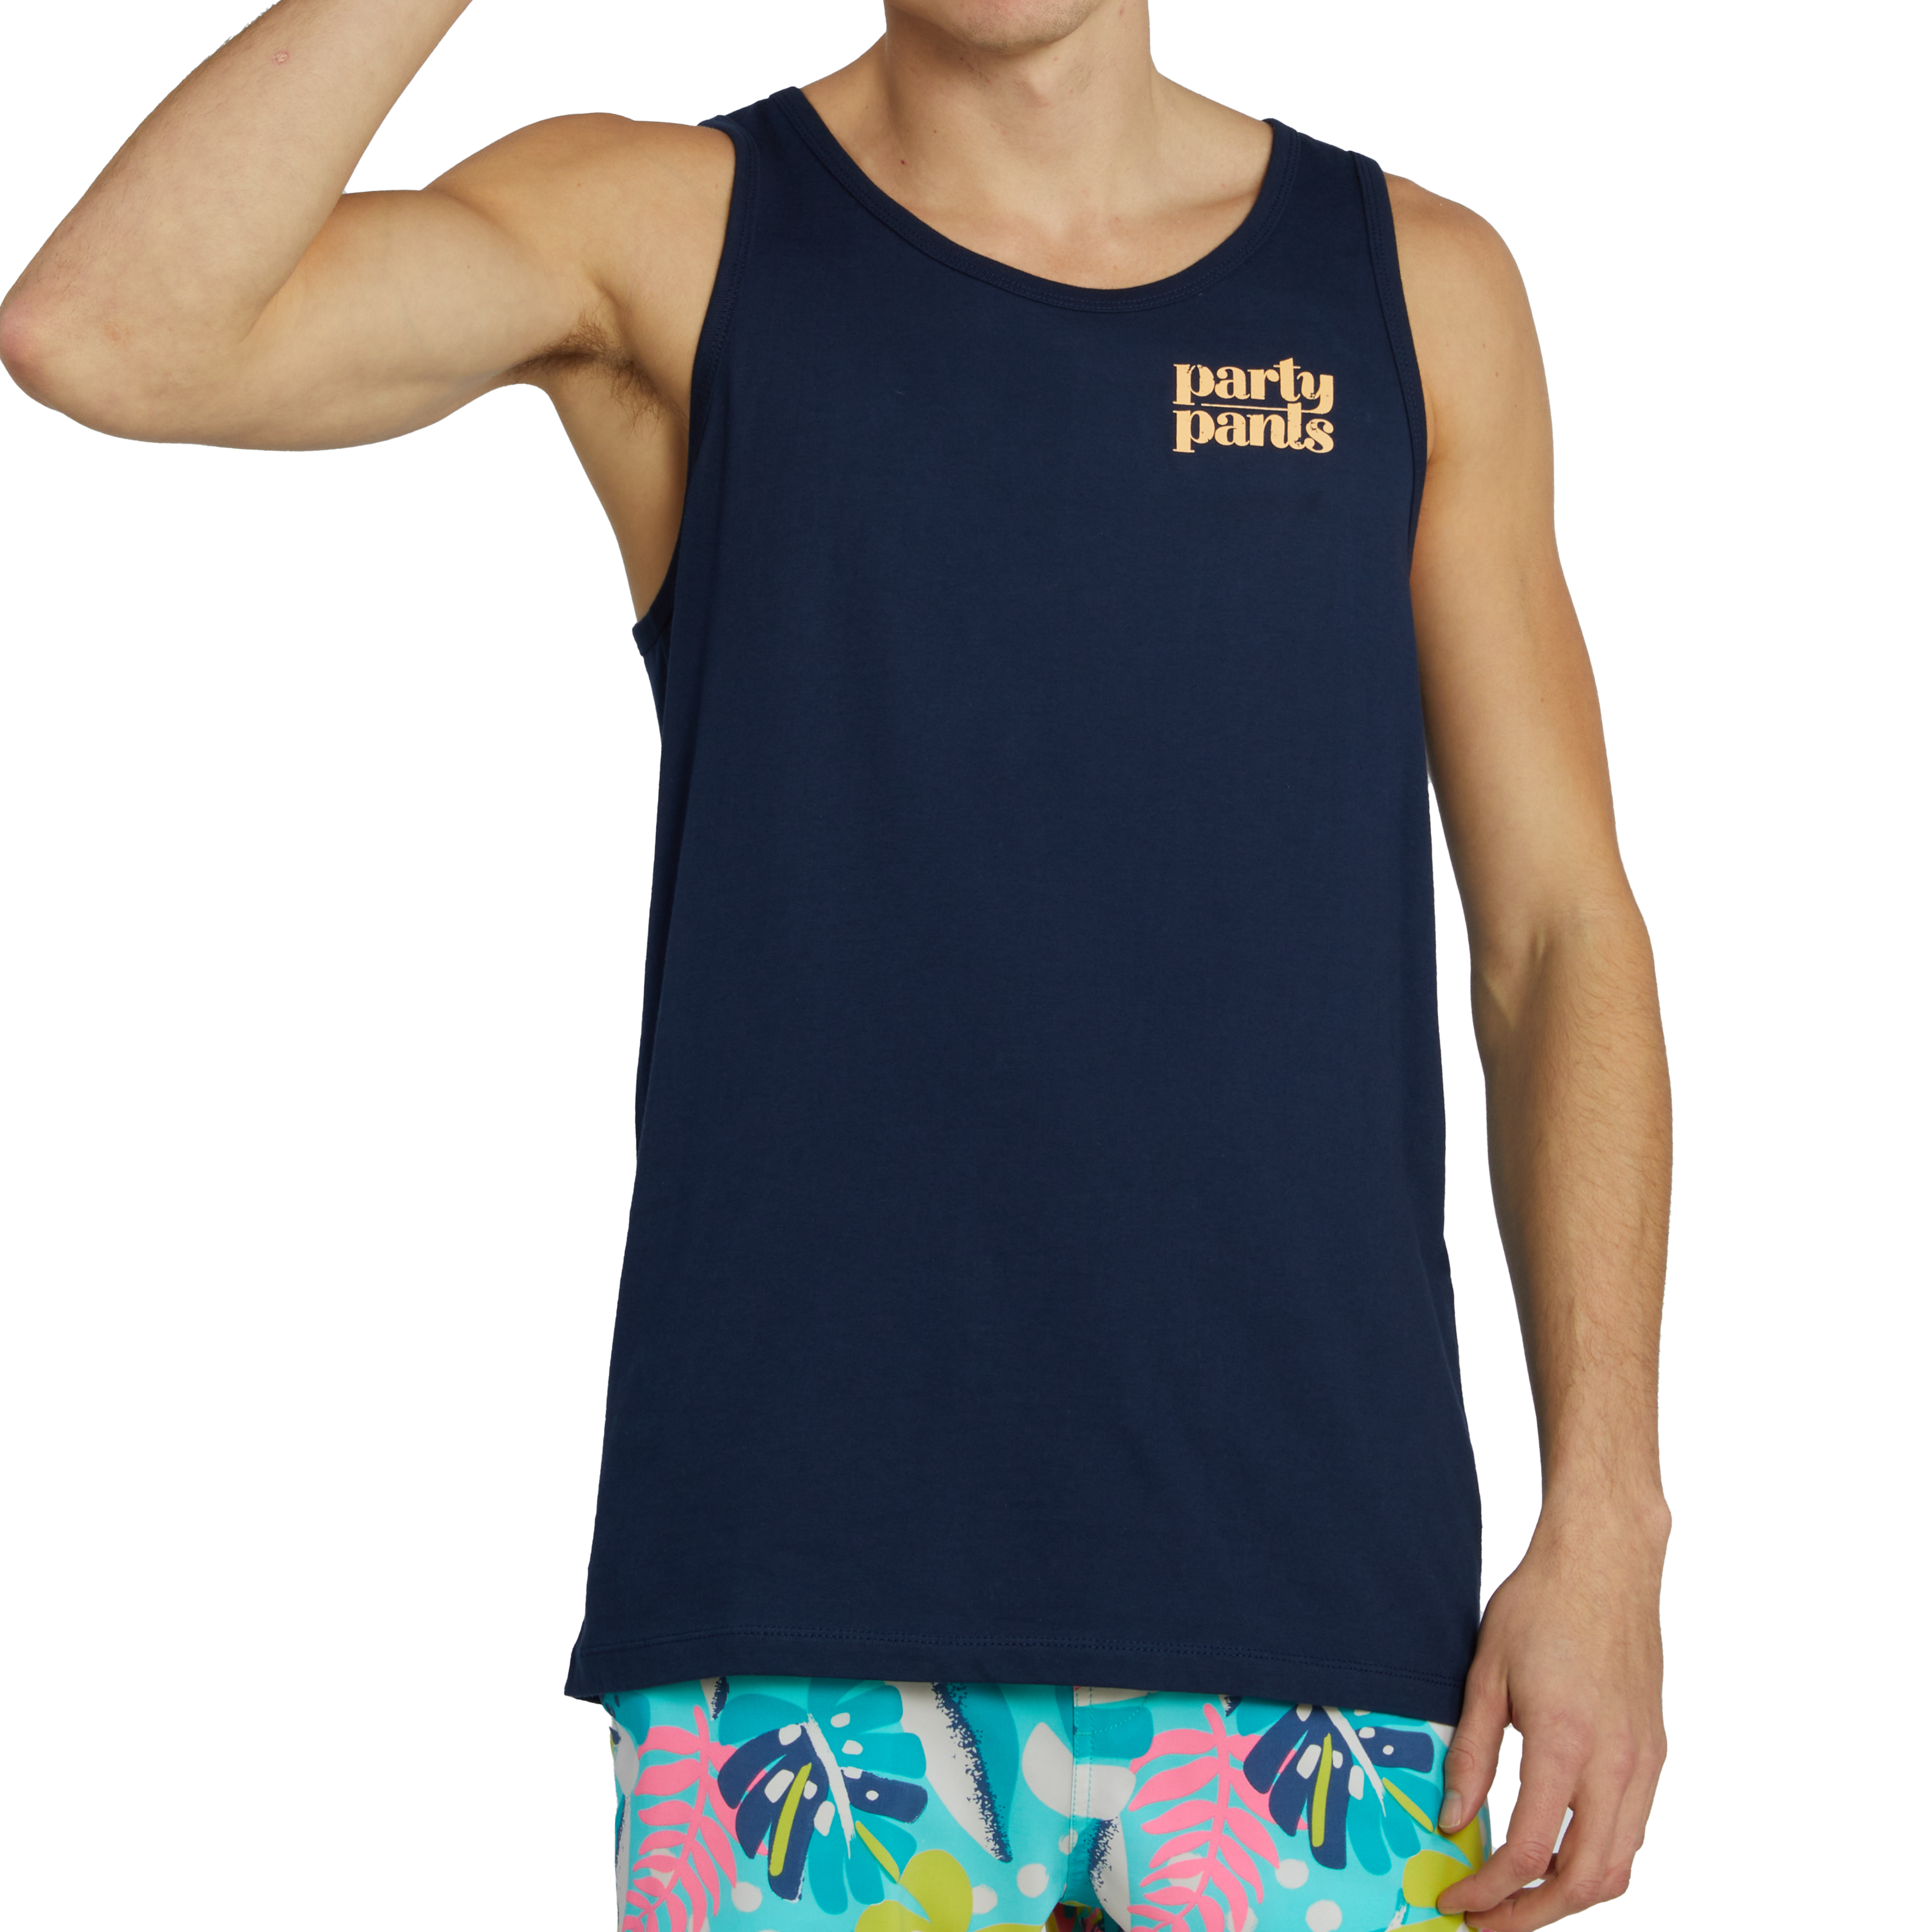 PARTY PANTS- DAY DINKERS TANK